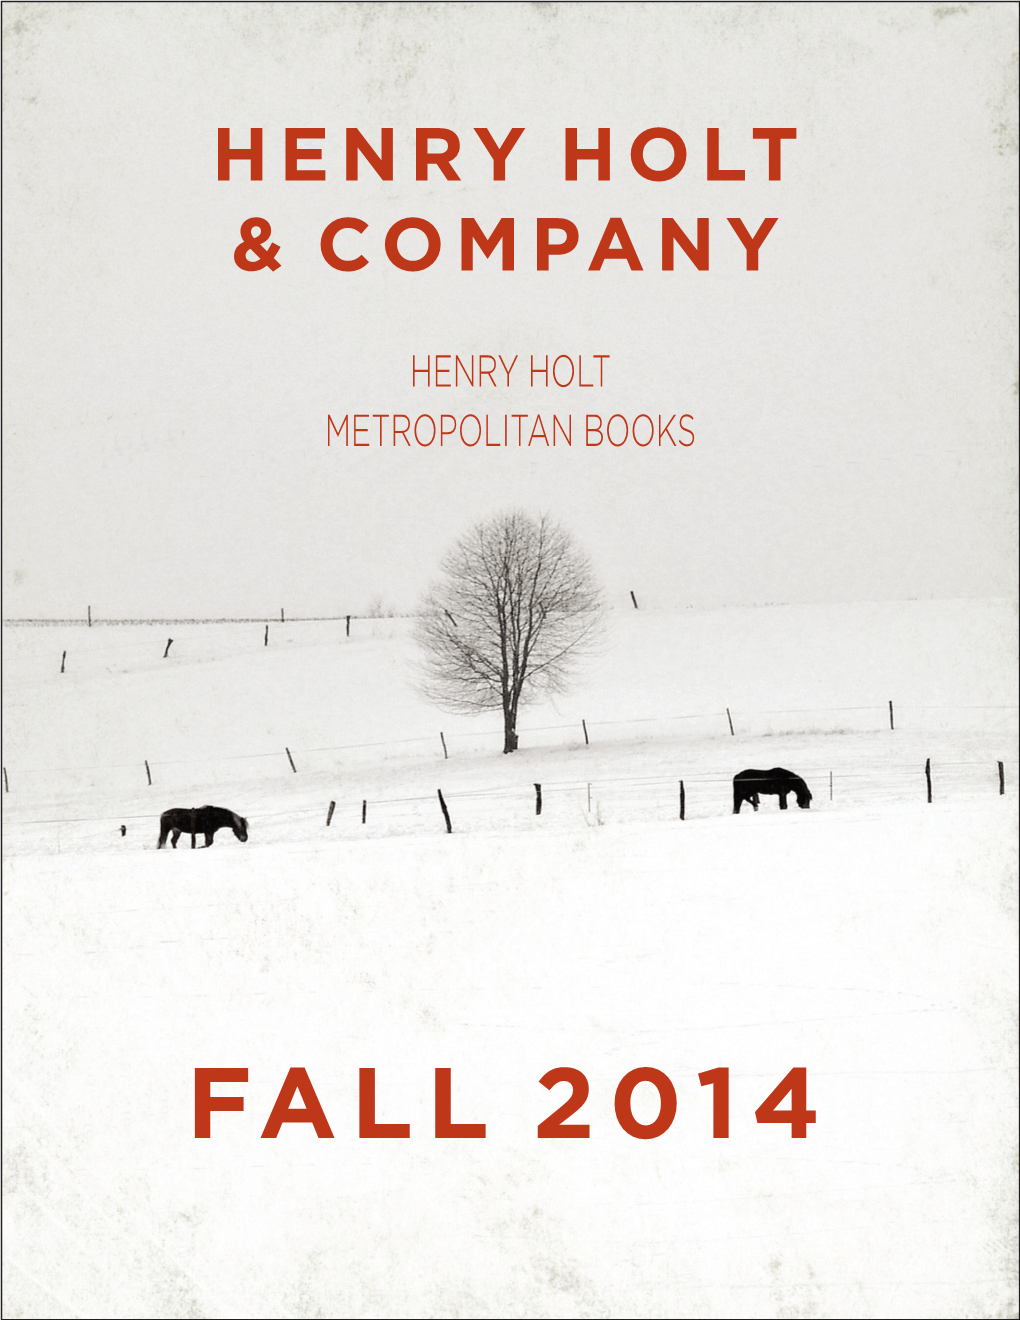 Fall 2014 Fiction / Short Stories Henry Holt and Co